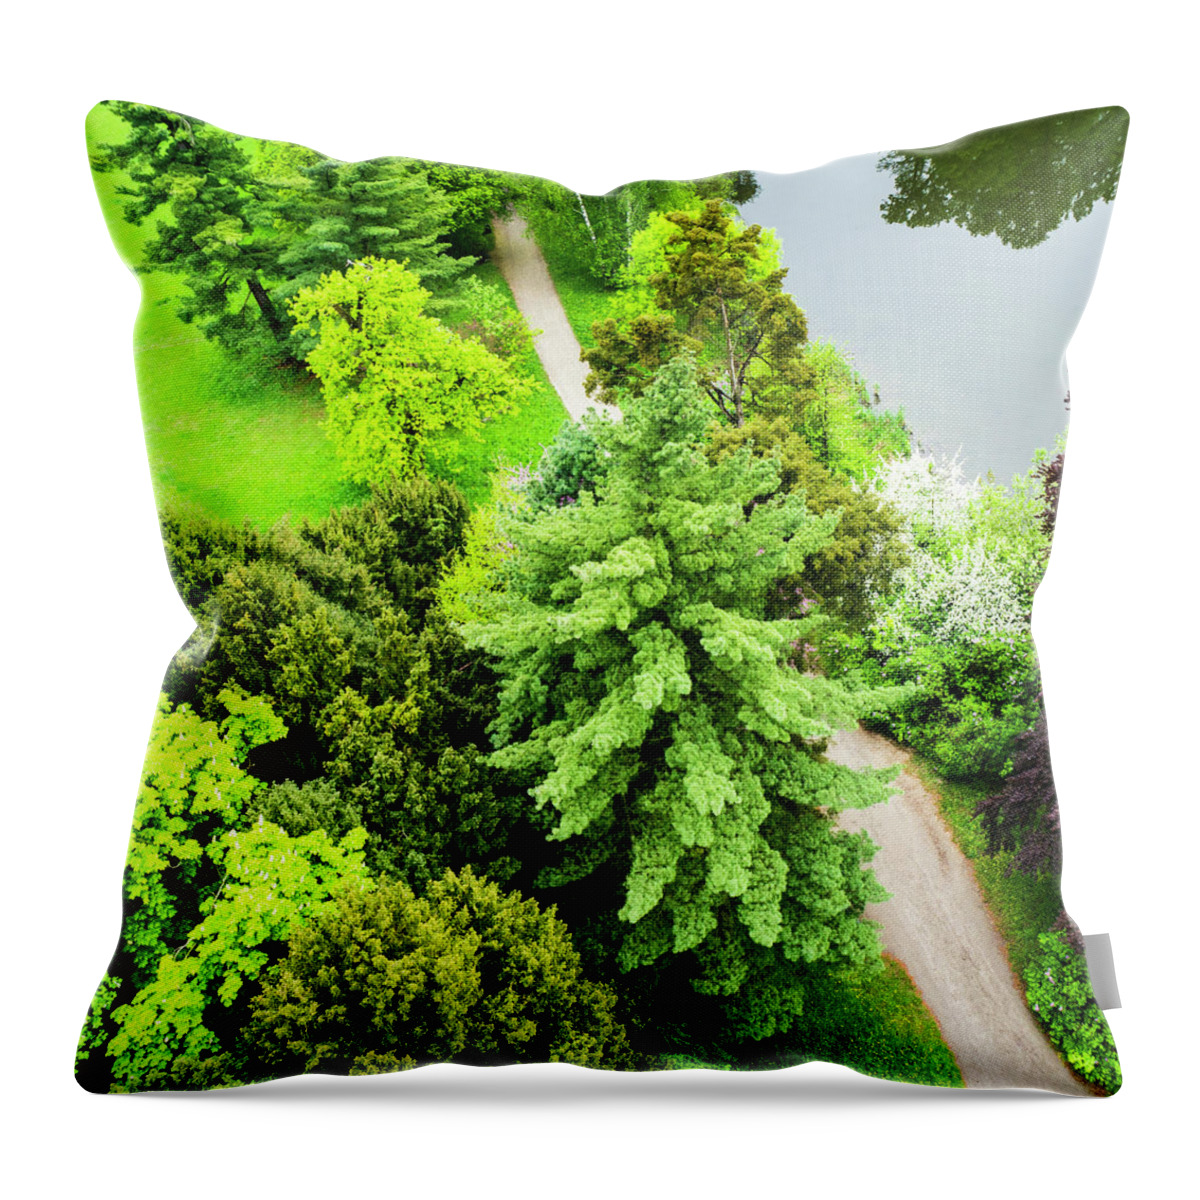 Scenics Throw Pillow featuring the photograph Beautiful Park With Trees, Grass by Domin domin